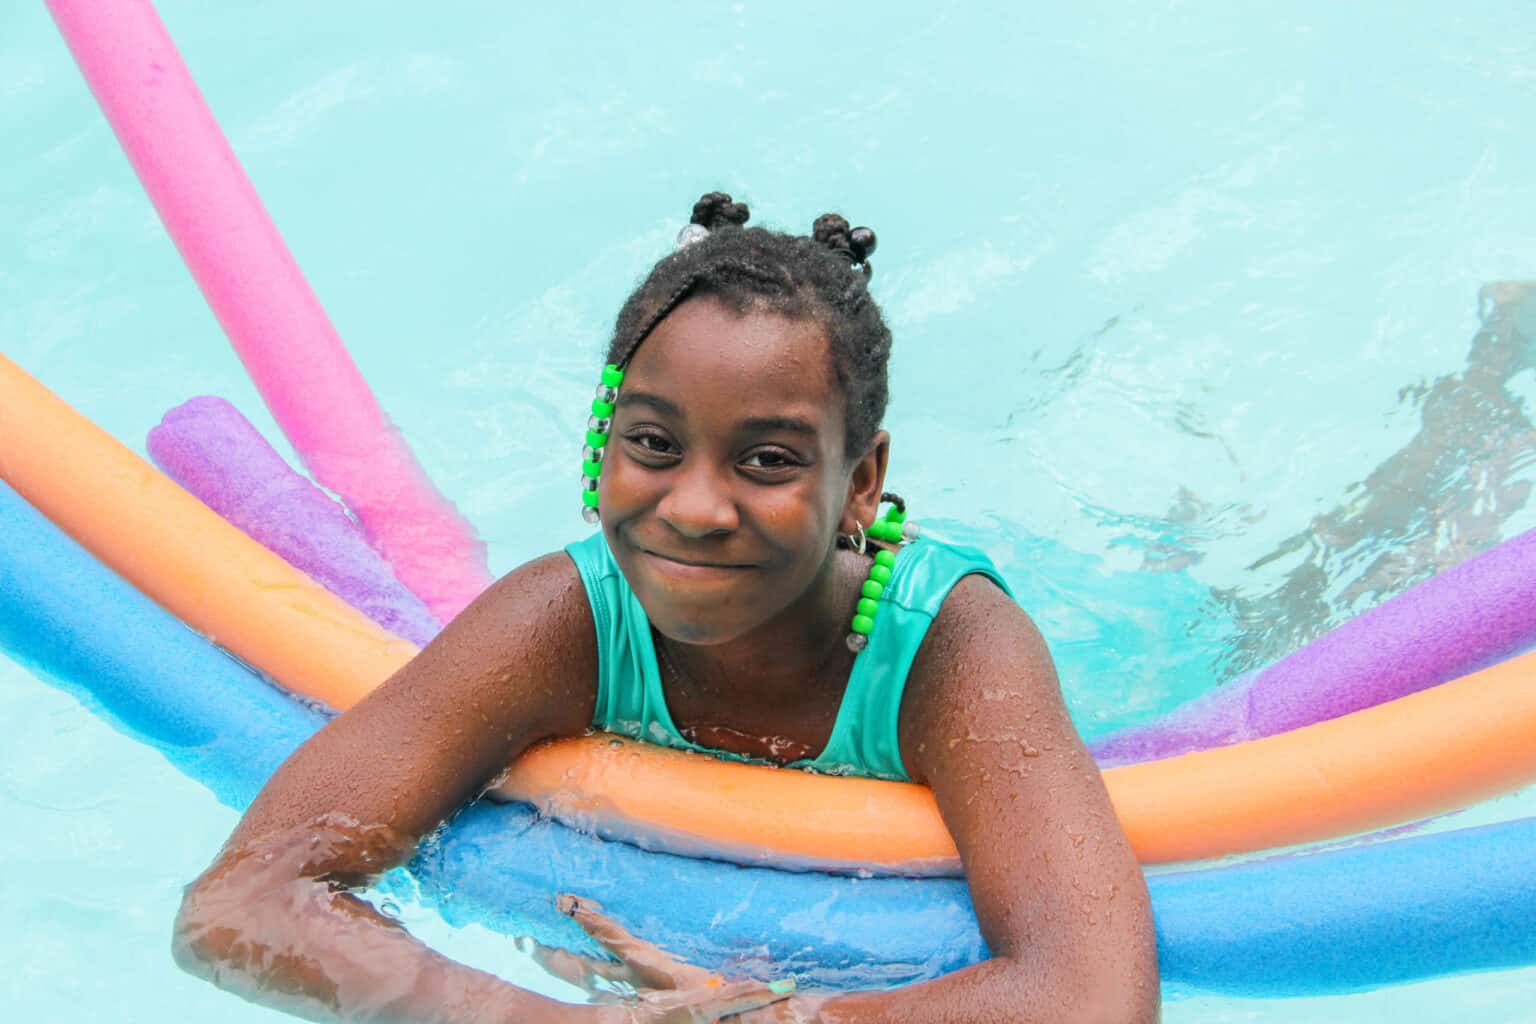 A young girl at a summer camp in Iowa enjoying a pool with colorful floats.